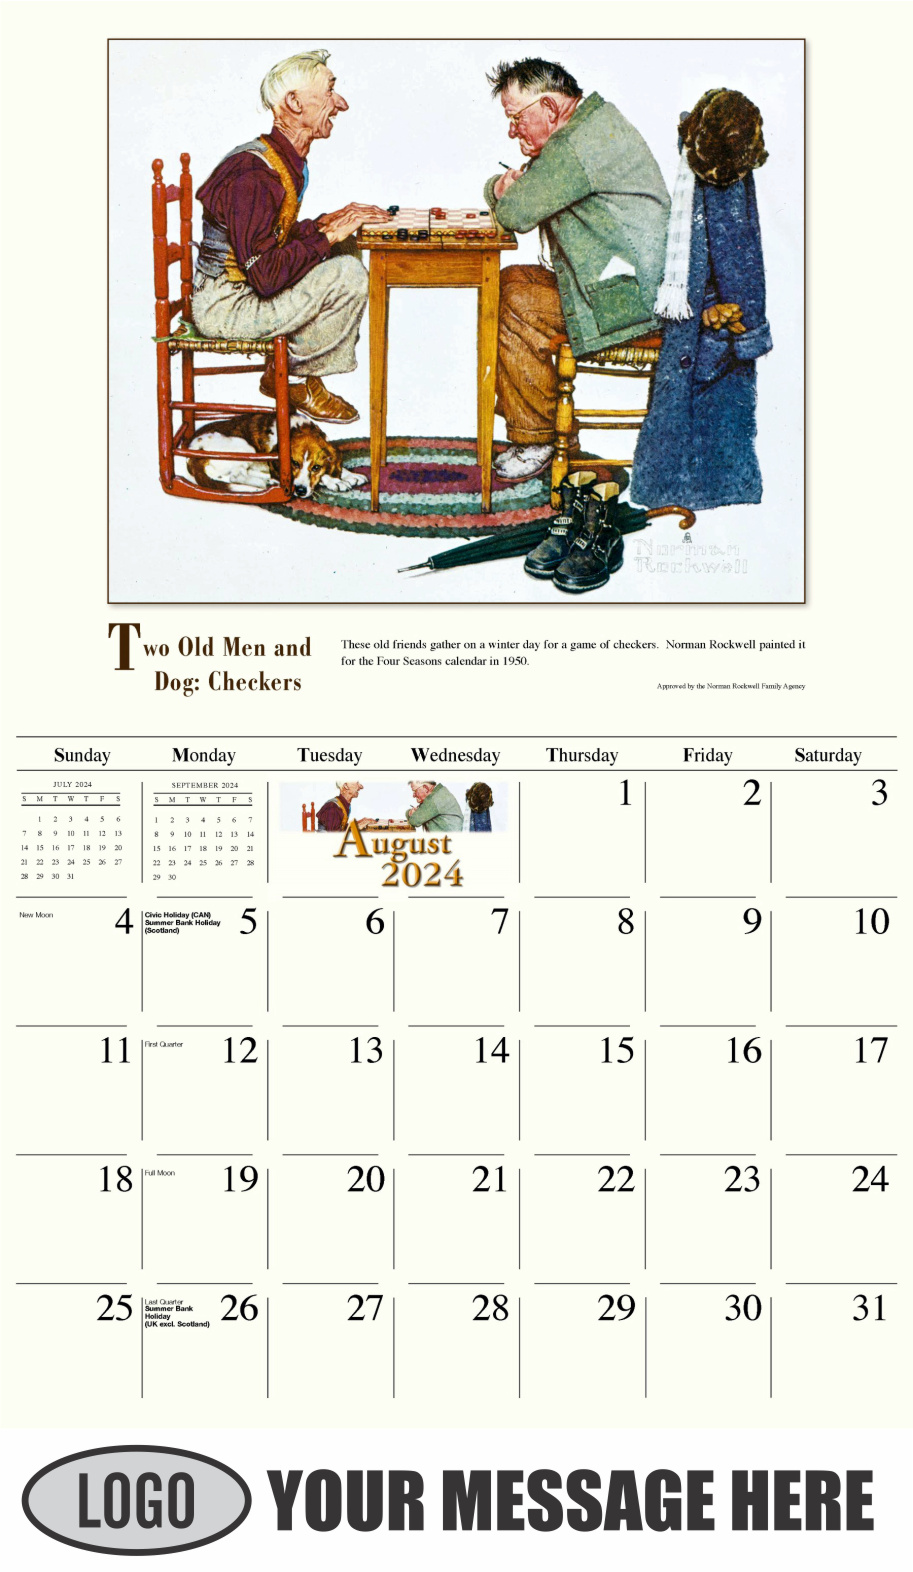 Memorable Images by Norman Rockwell 2024 Business Promotional Wall Calendar - August